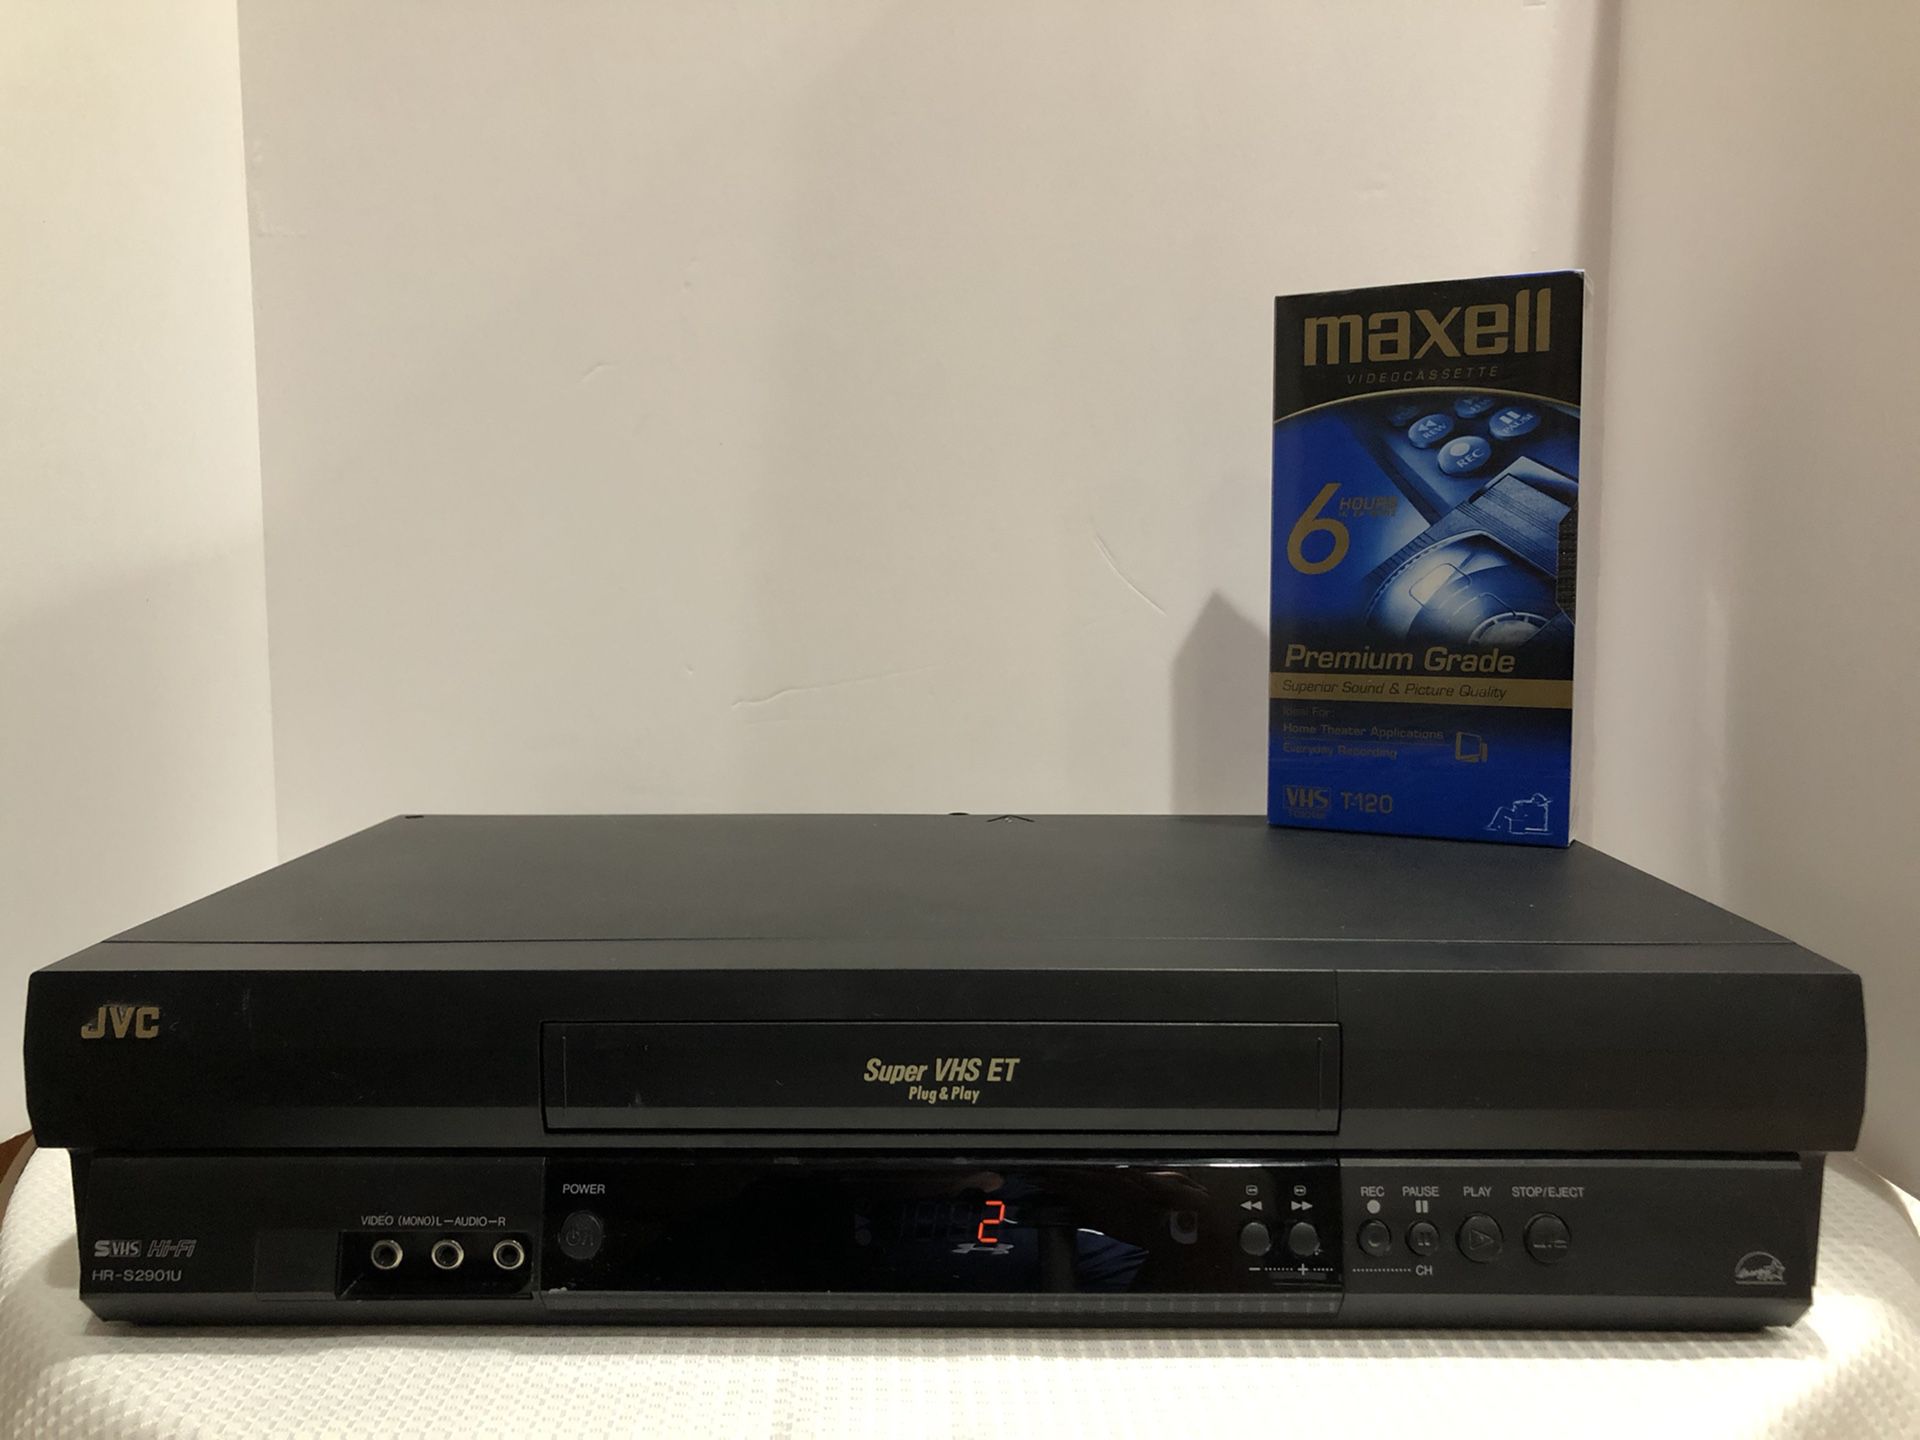 JVC Super VHS ET VCR HR-S2901U Plug and Play *TESTED* Working No Remote